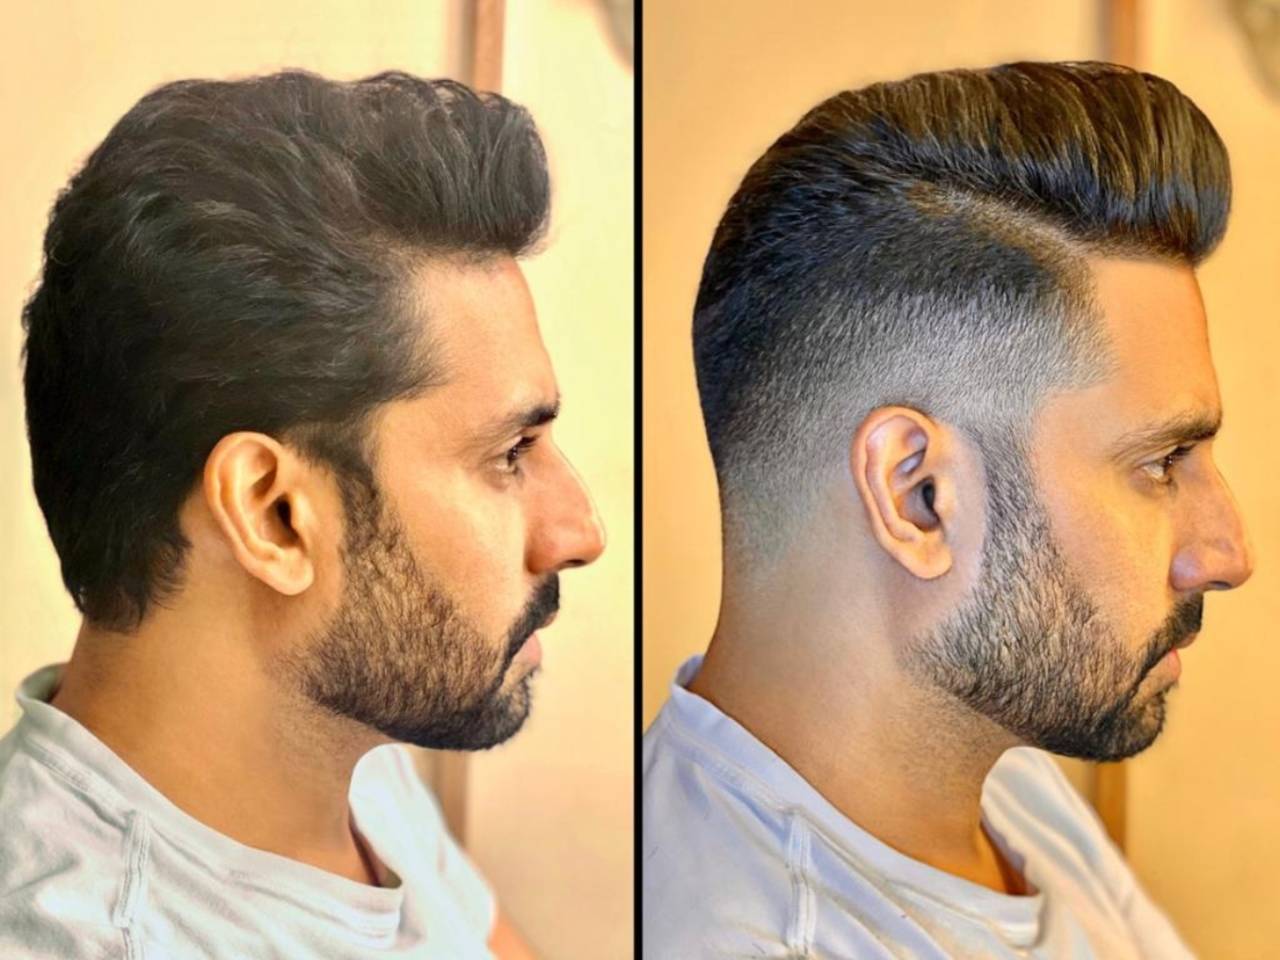 2020 Mens Latest Hairstyle ImagesMens Hairstyles Trends 2020Gents  HairstylesBoys Hairstyles  YouTube